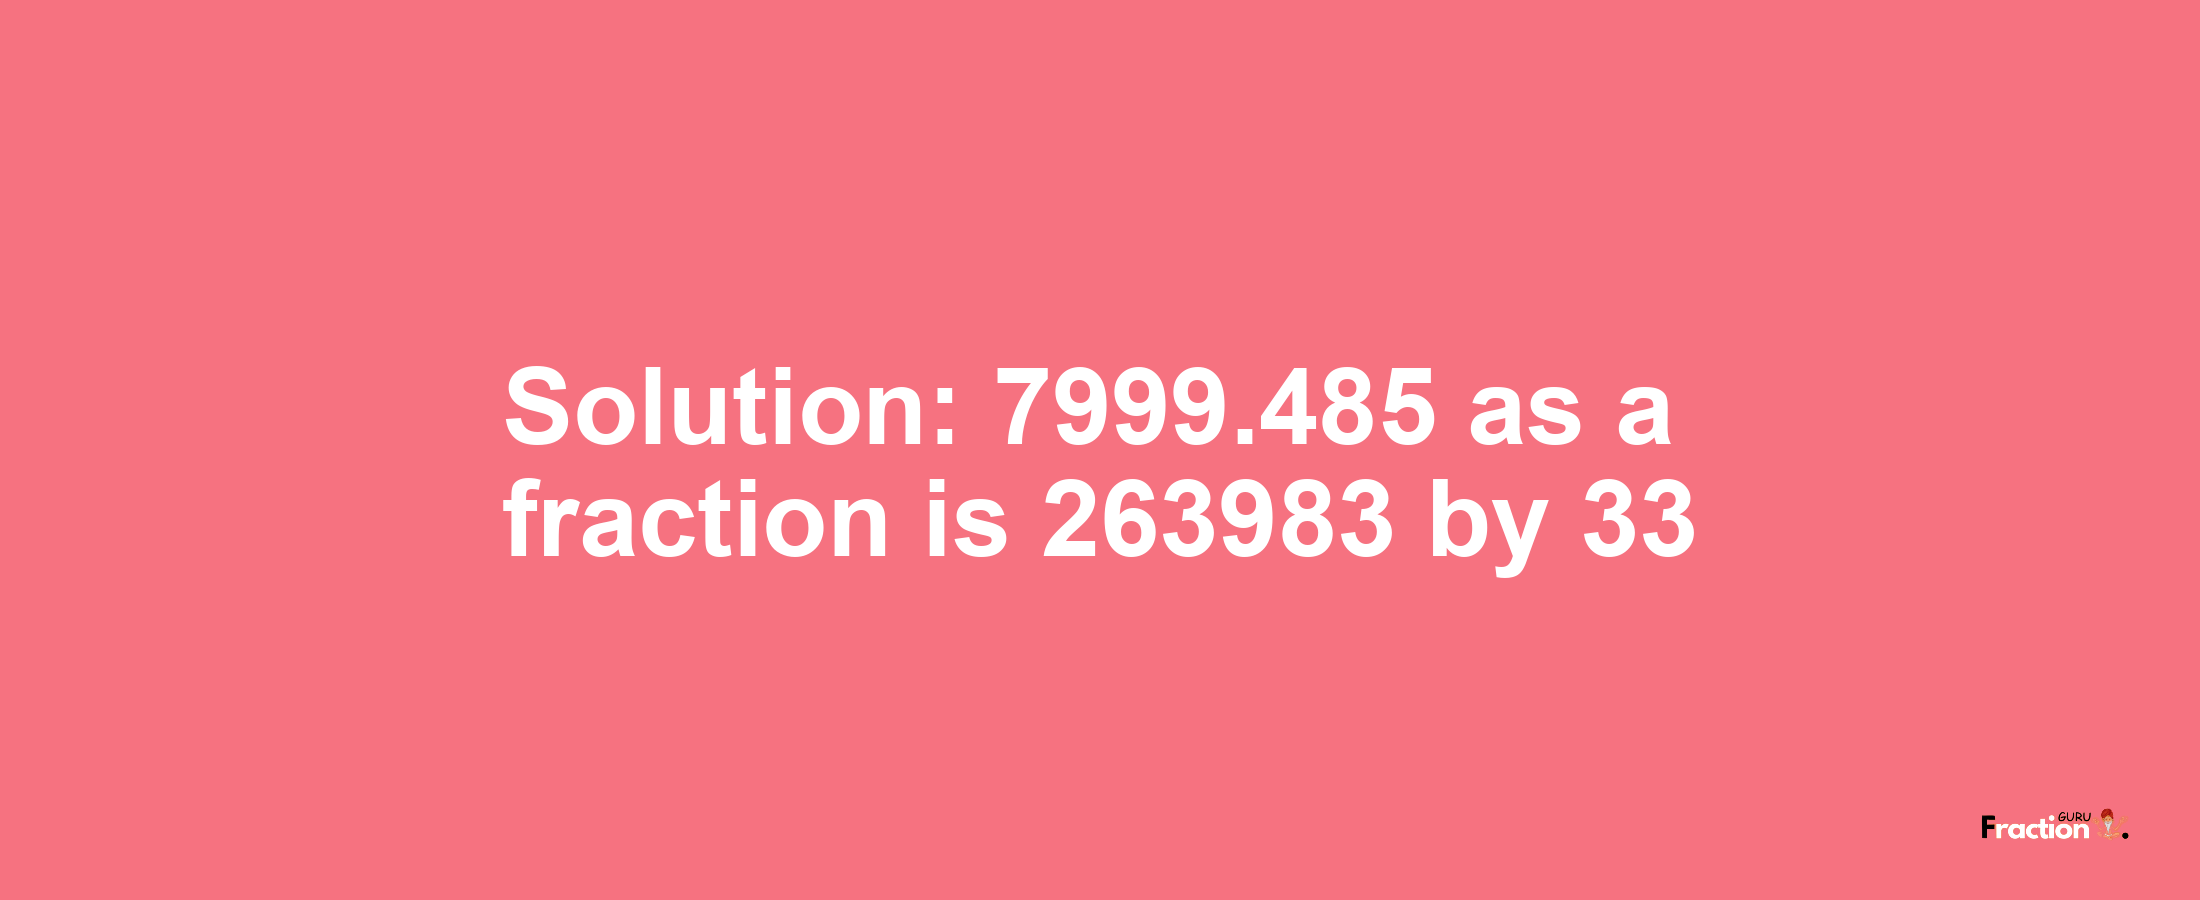 Solution:7999.485 as a fraction is 263983/33